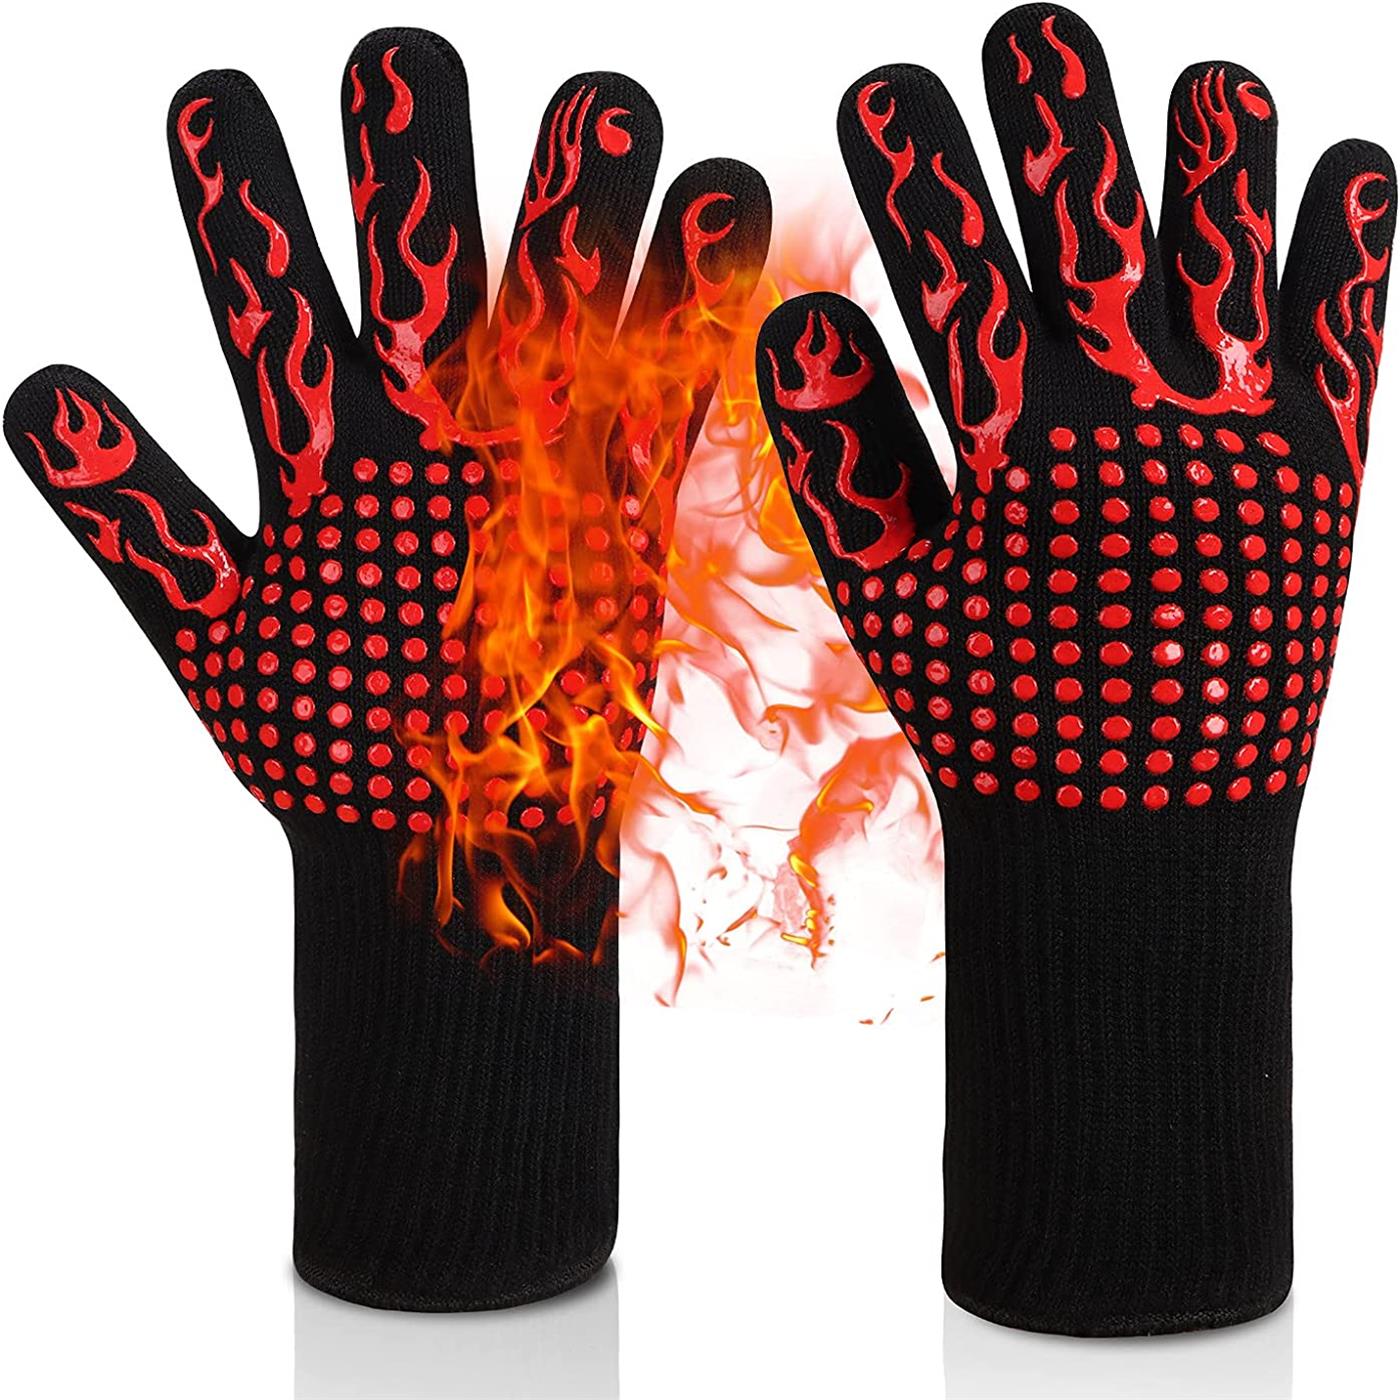  Heat Resistant Silicone Oven Gloves,Oven Gloves,1 Pair